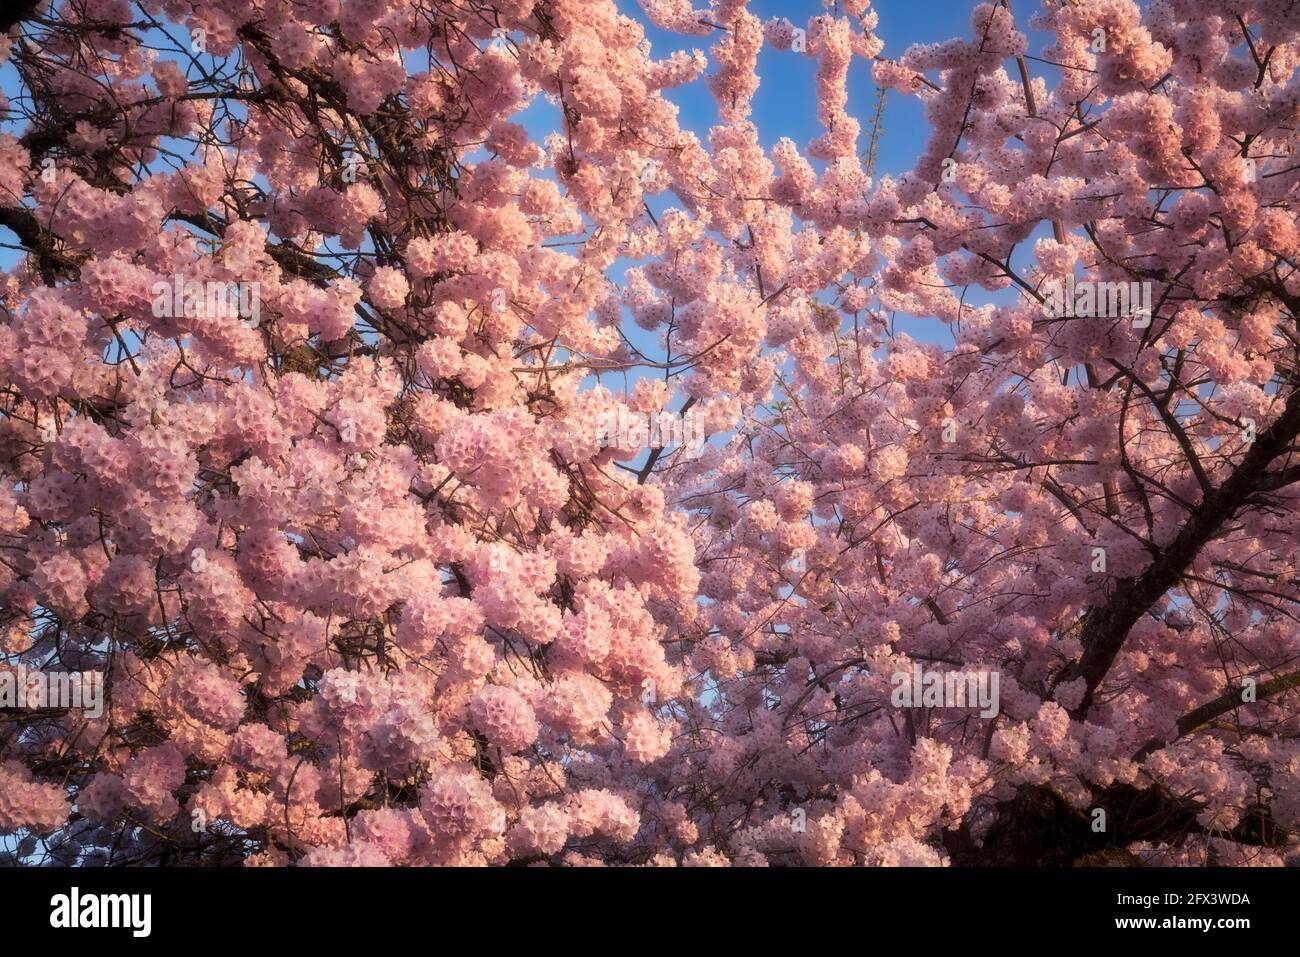 Evening light glow on these spring blooming Japanese cherry trees found among many urban neighborhoods in Oregon’s Multnomah County. Stock Photo